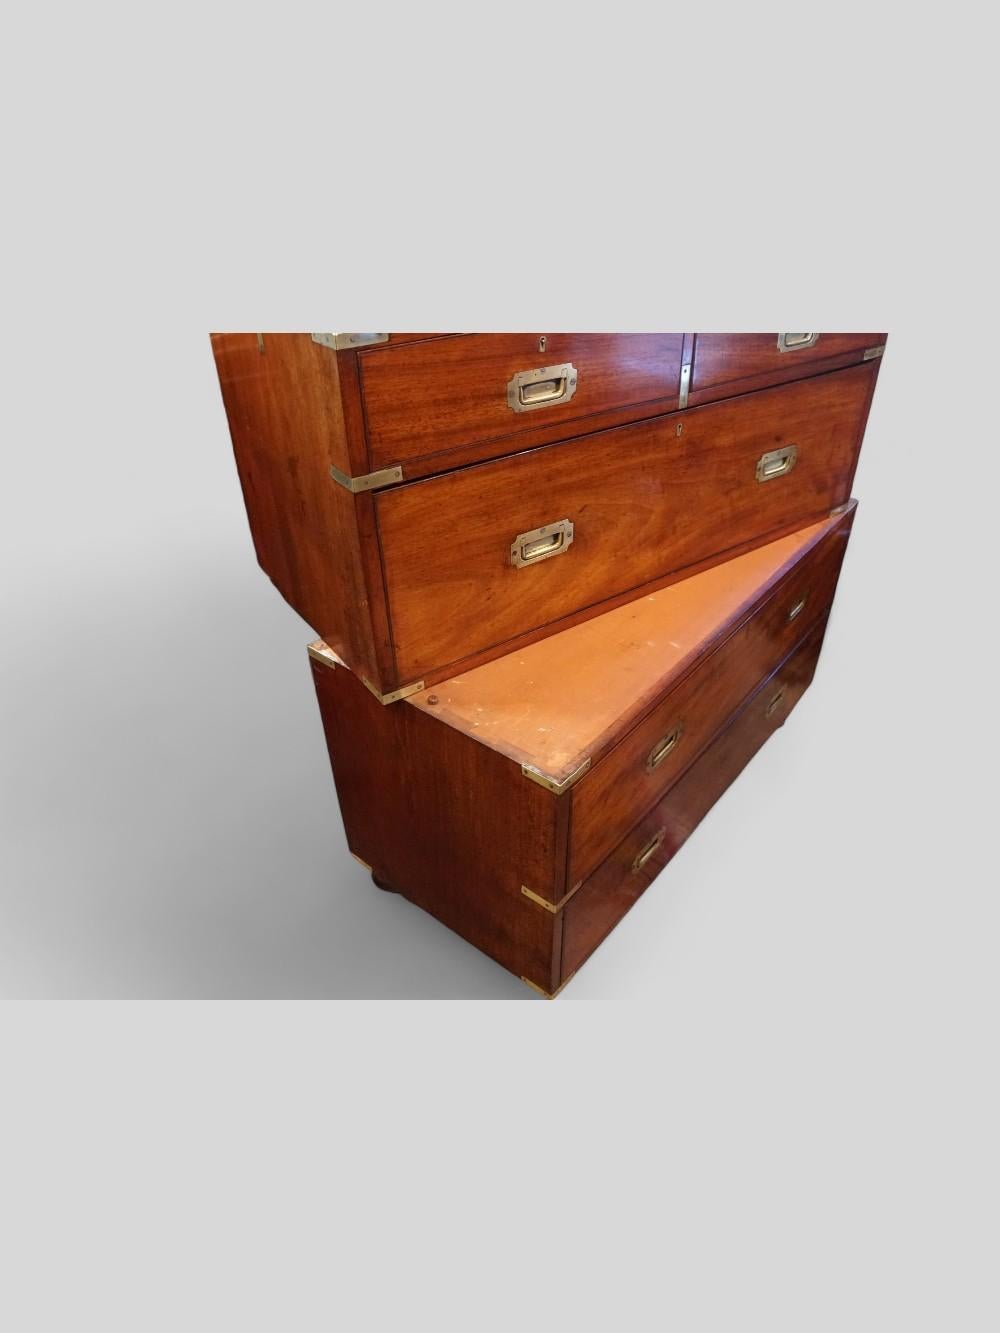 The Victorian campaign chest would have been commissioned / purchased from a specialist military officers outfitters, usually the Army & Navy stores. This example is their classic design, although it does not have their trade label.
Once an Officer